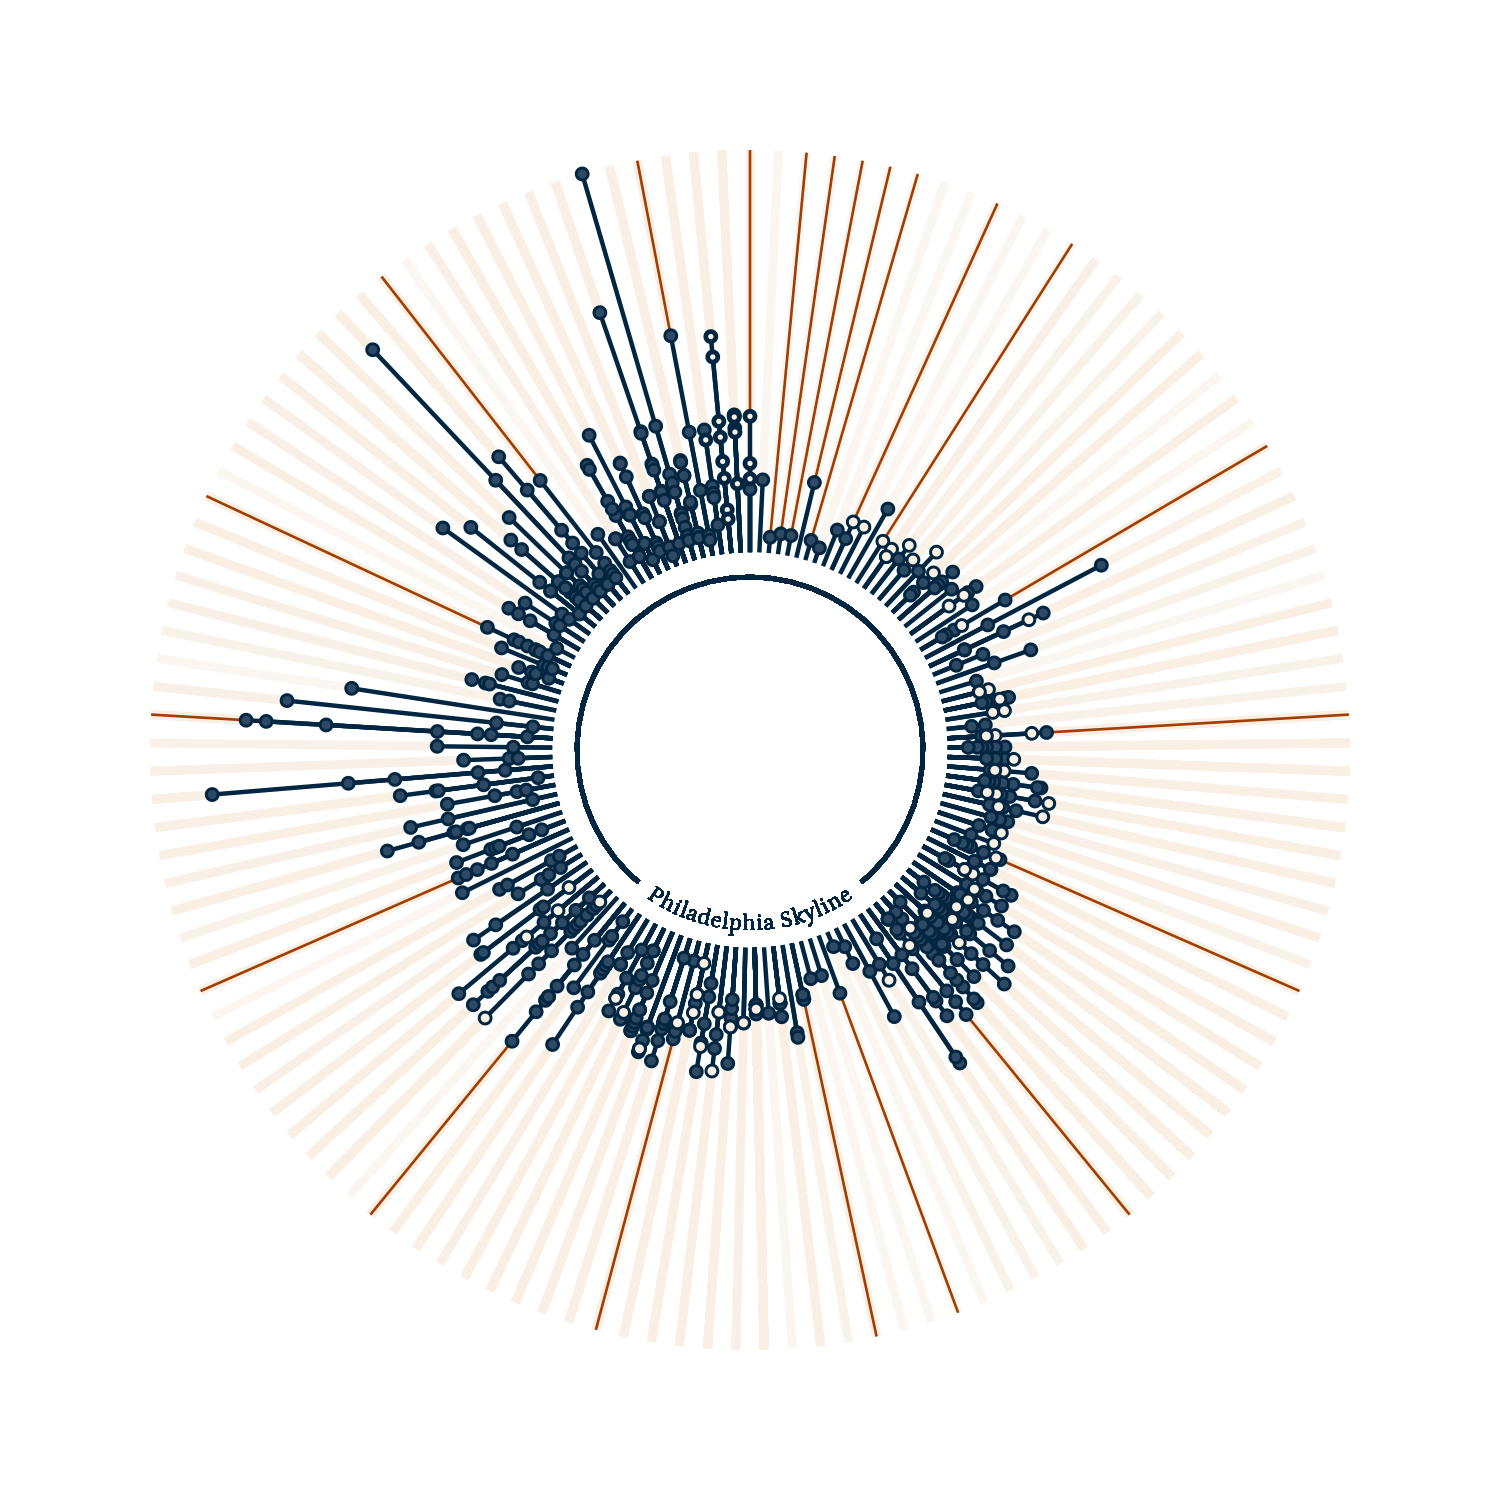 Abstract data visualization depicting tall buildings in Philadelphia as a circle. The text inside the circle reads Philadelphia Skyline